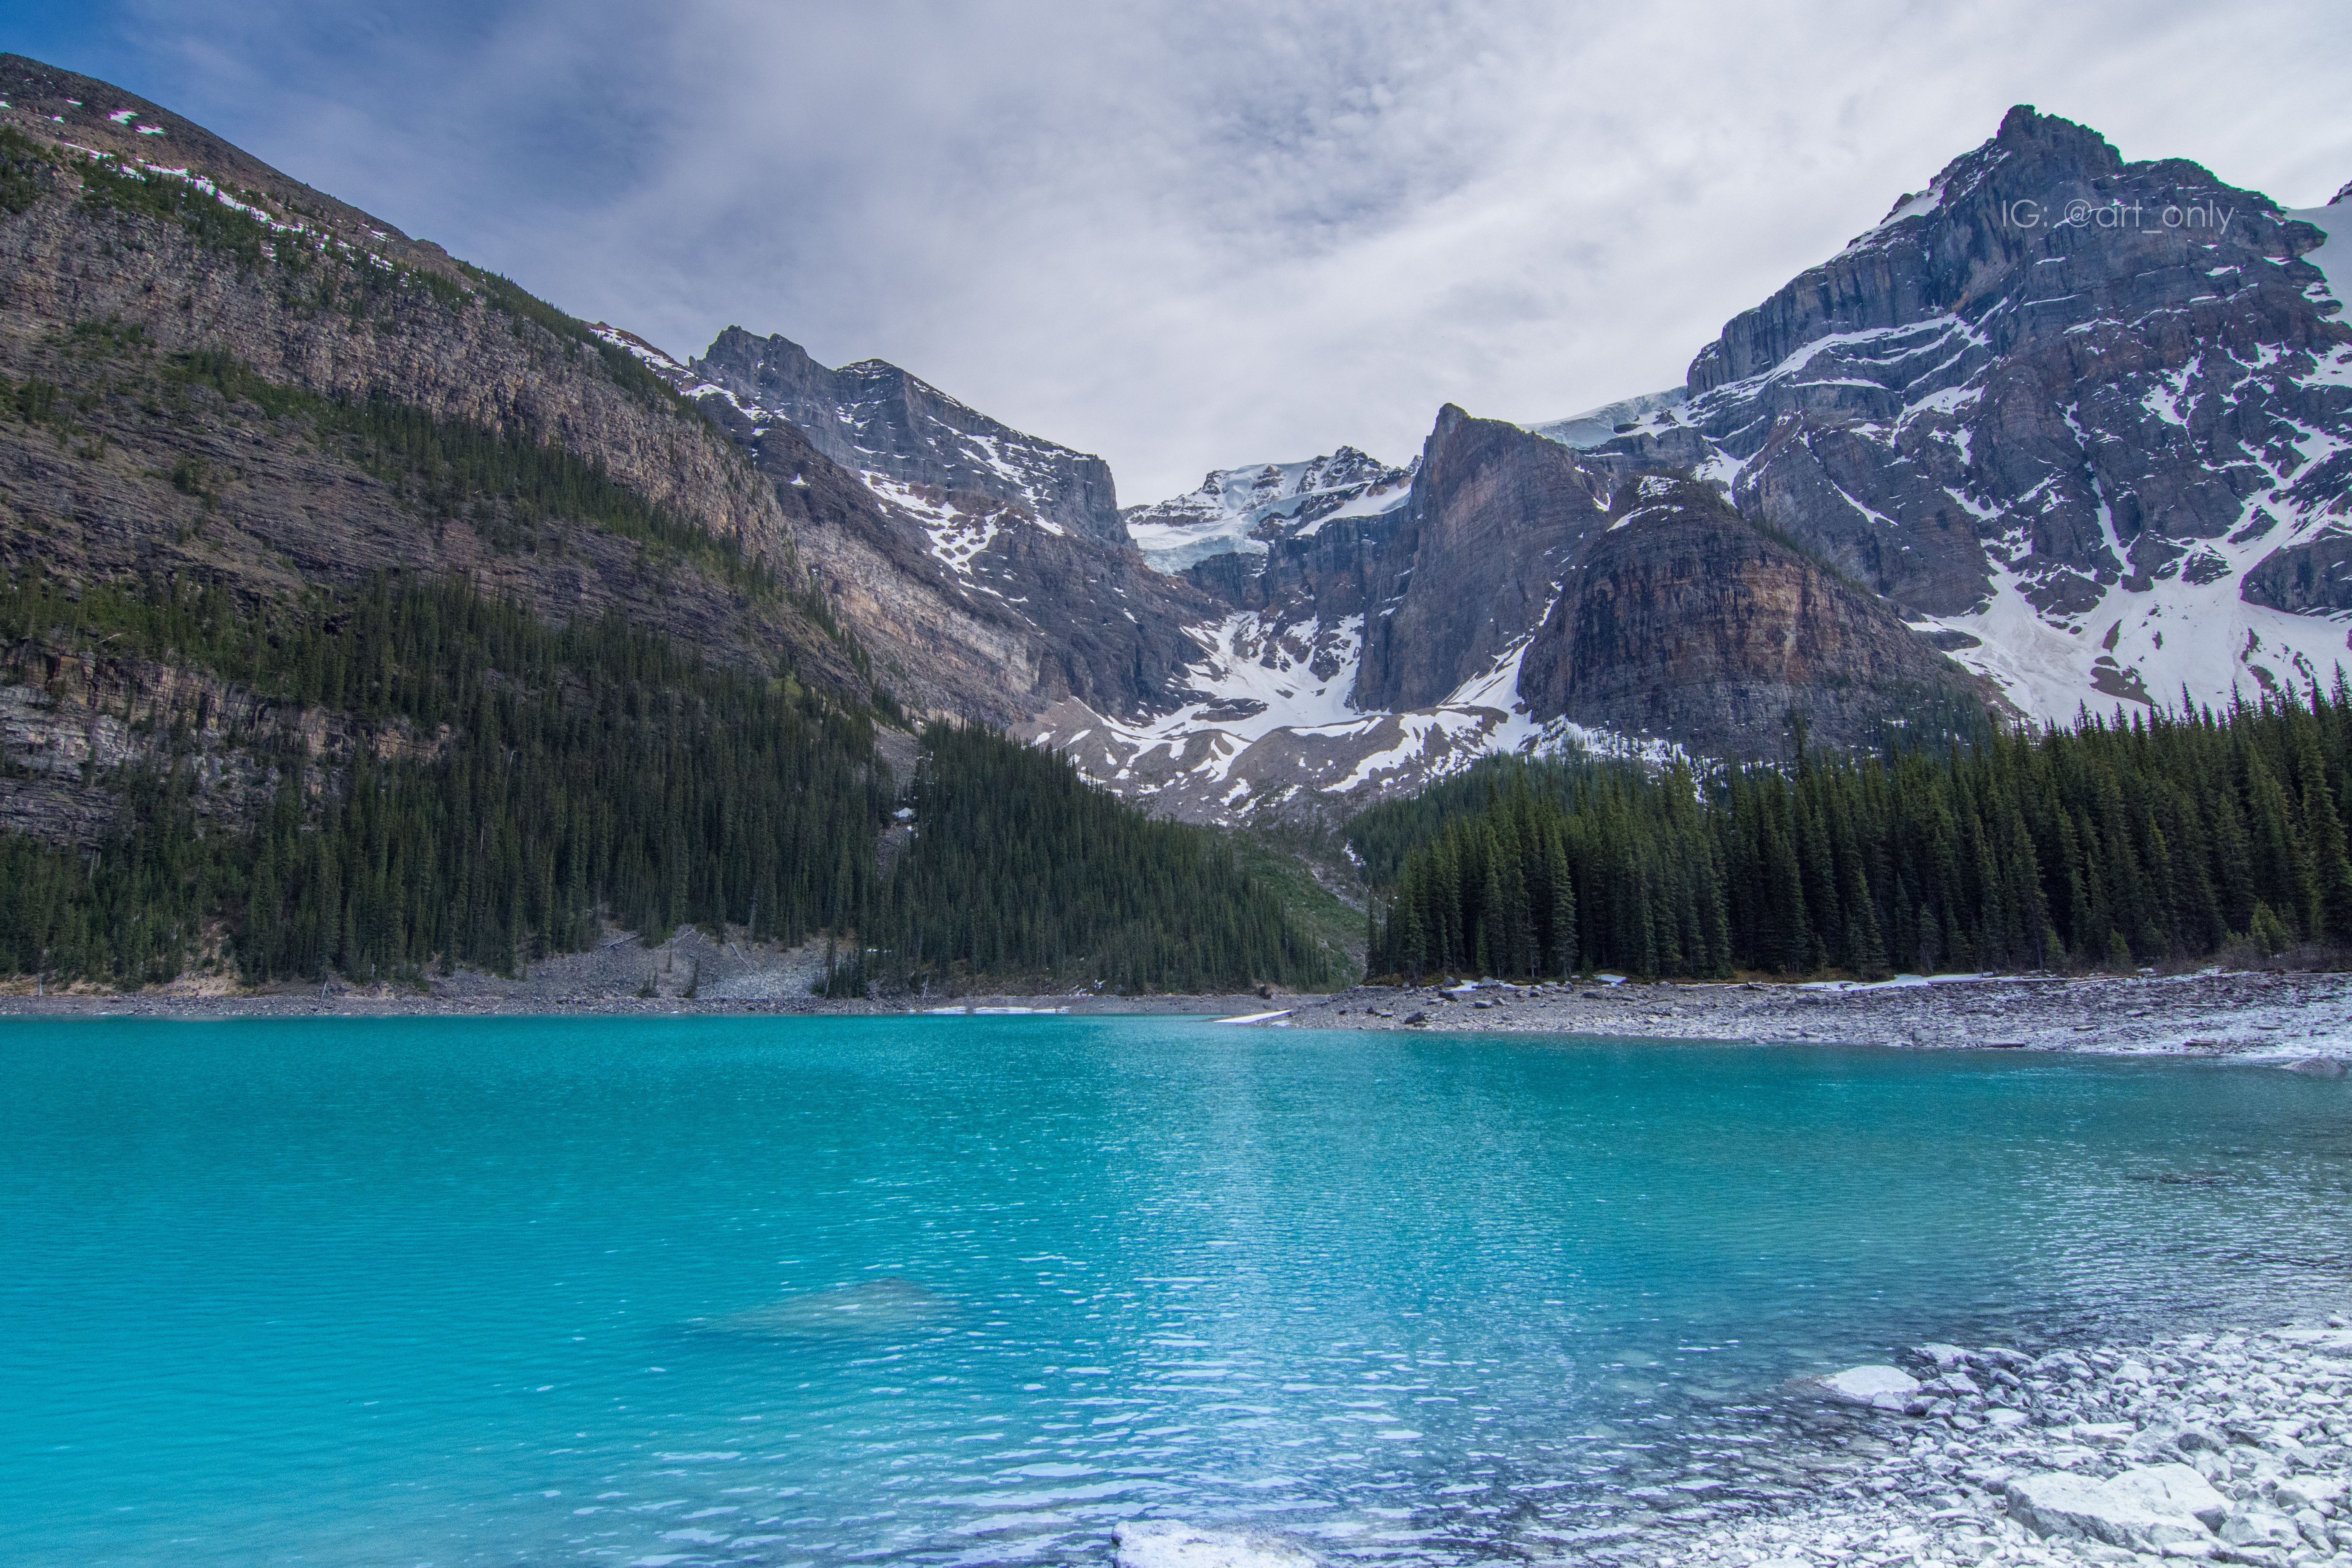 General 5513x3675 lake nature mountains snow trees Moraine Lake Banff National Park Canada landscape water outdoors